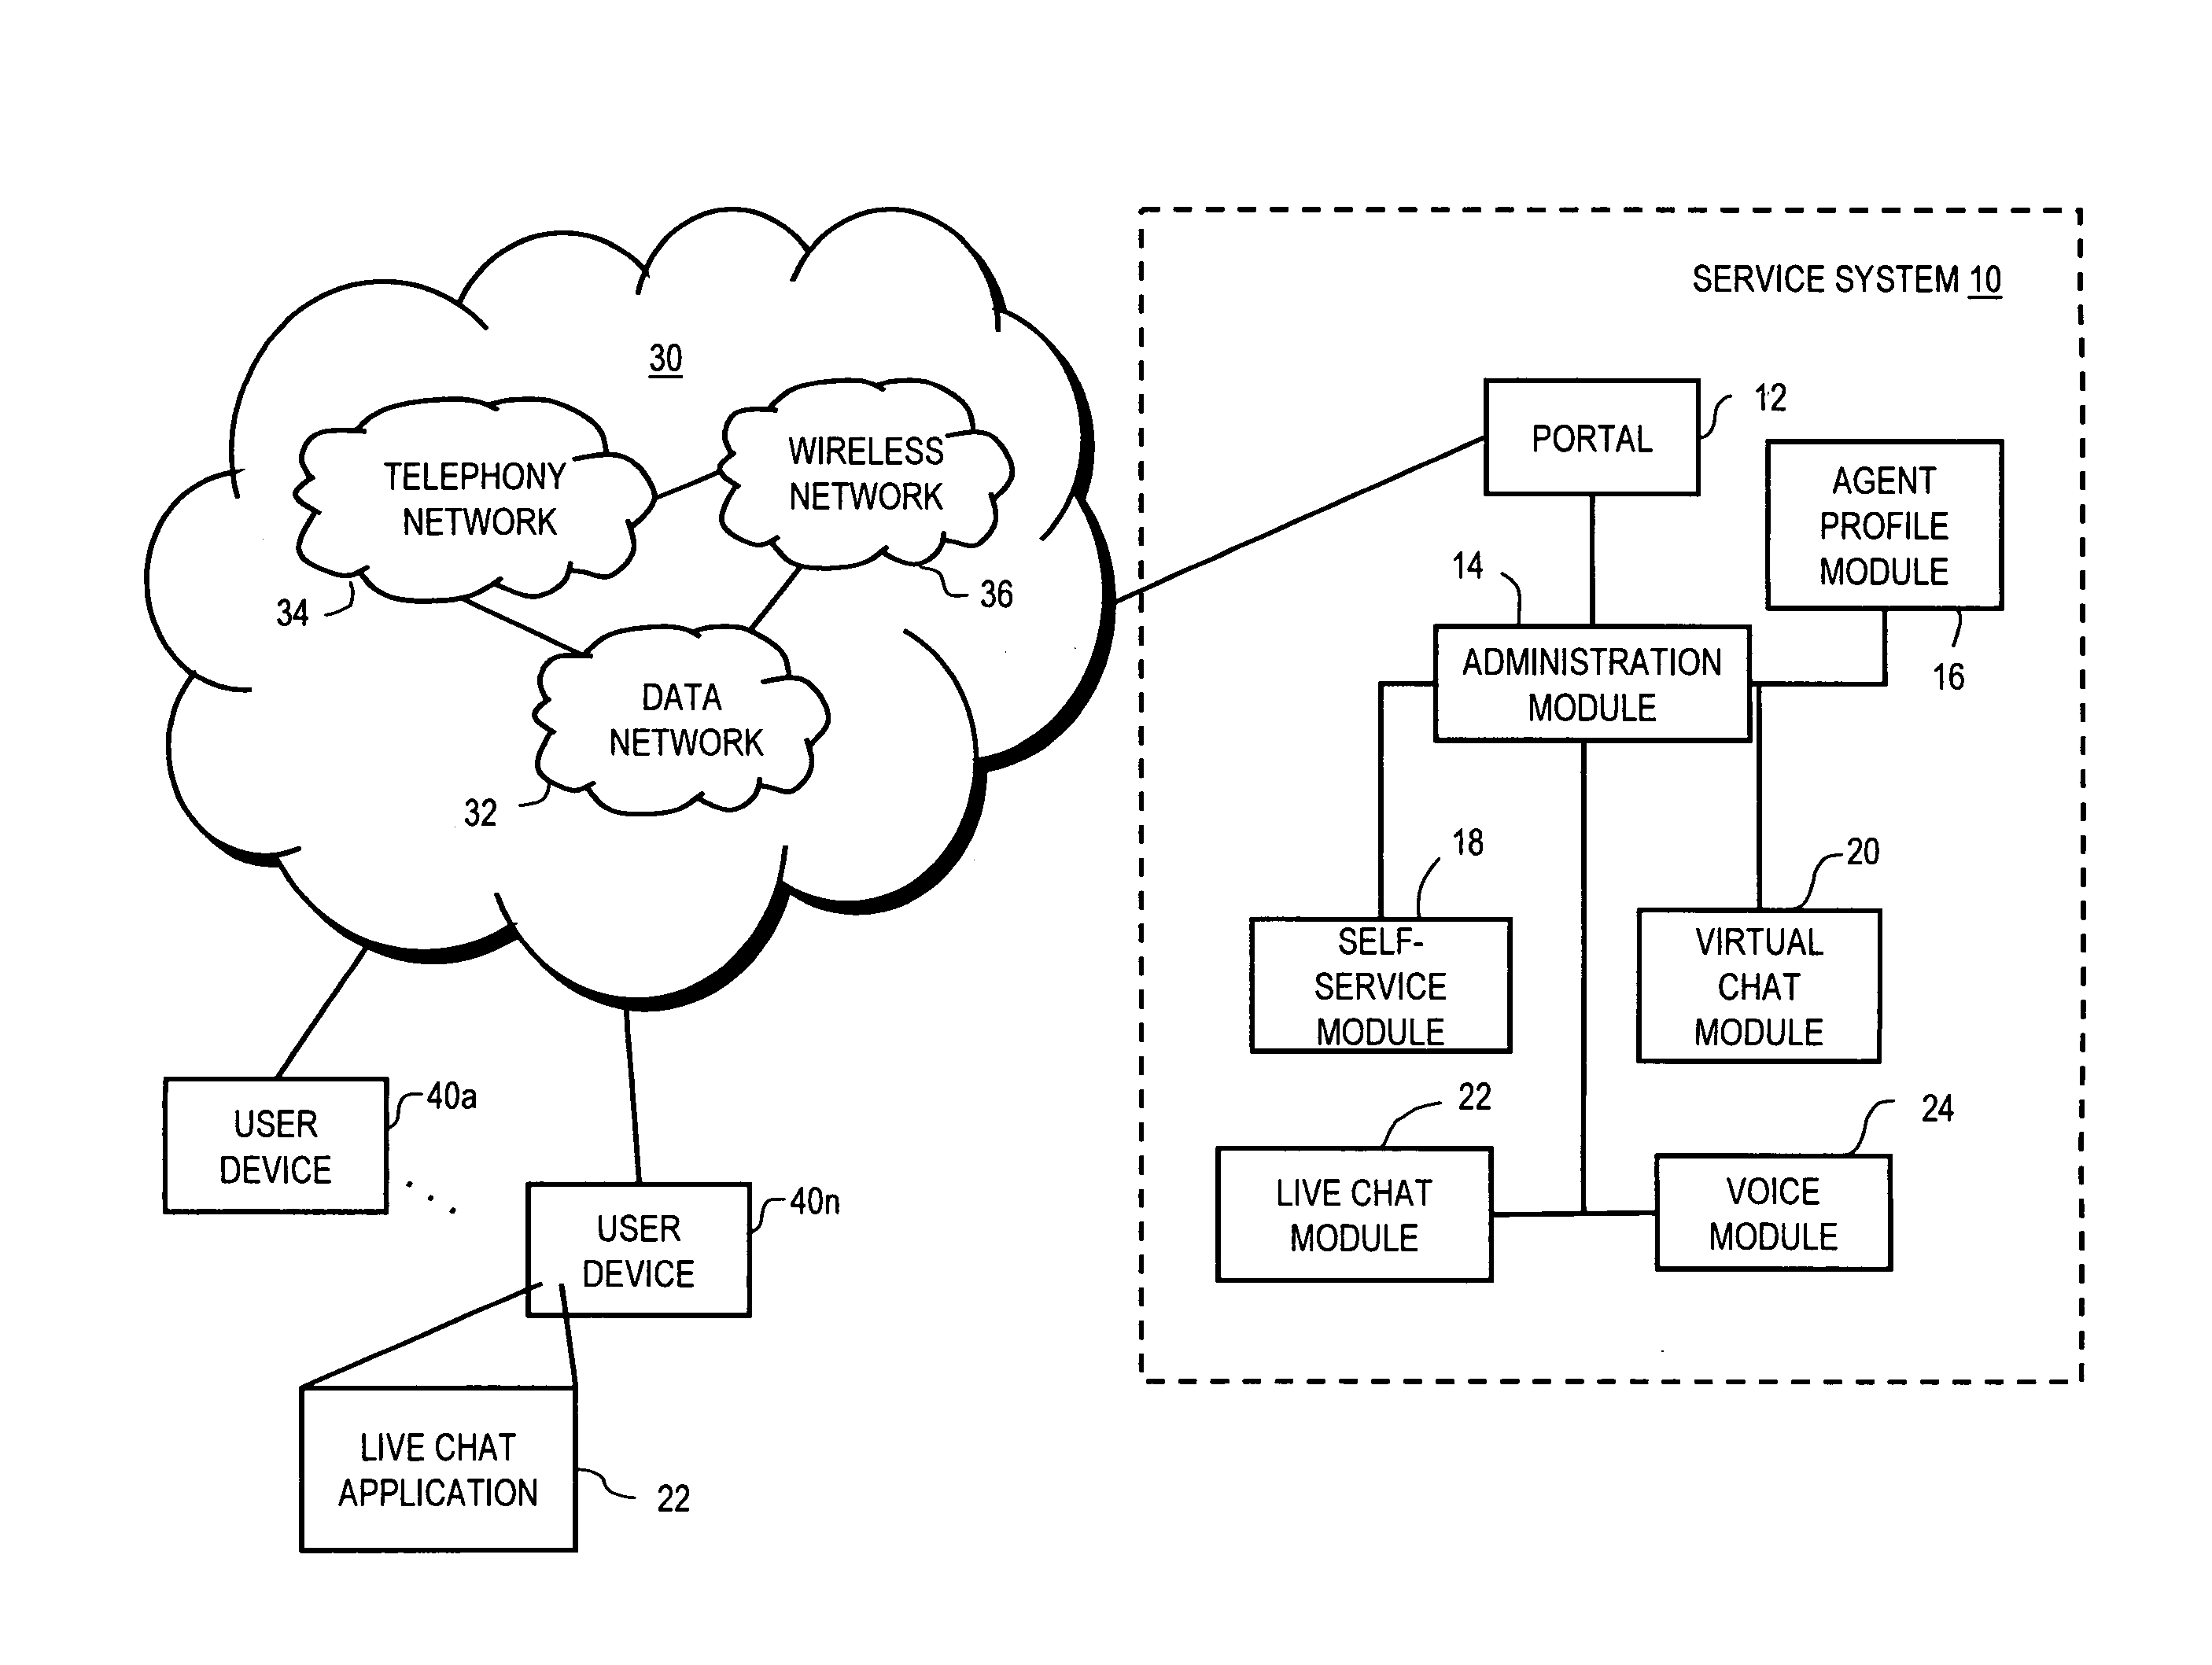 Method and system of providing service assistance using a hierarchical order of communication channels